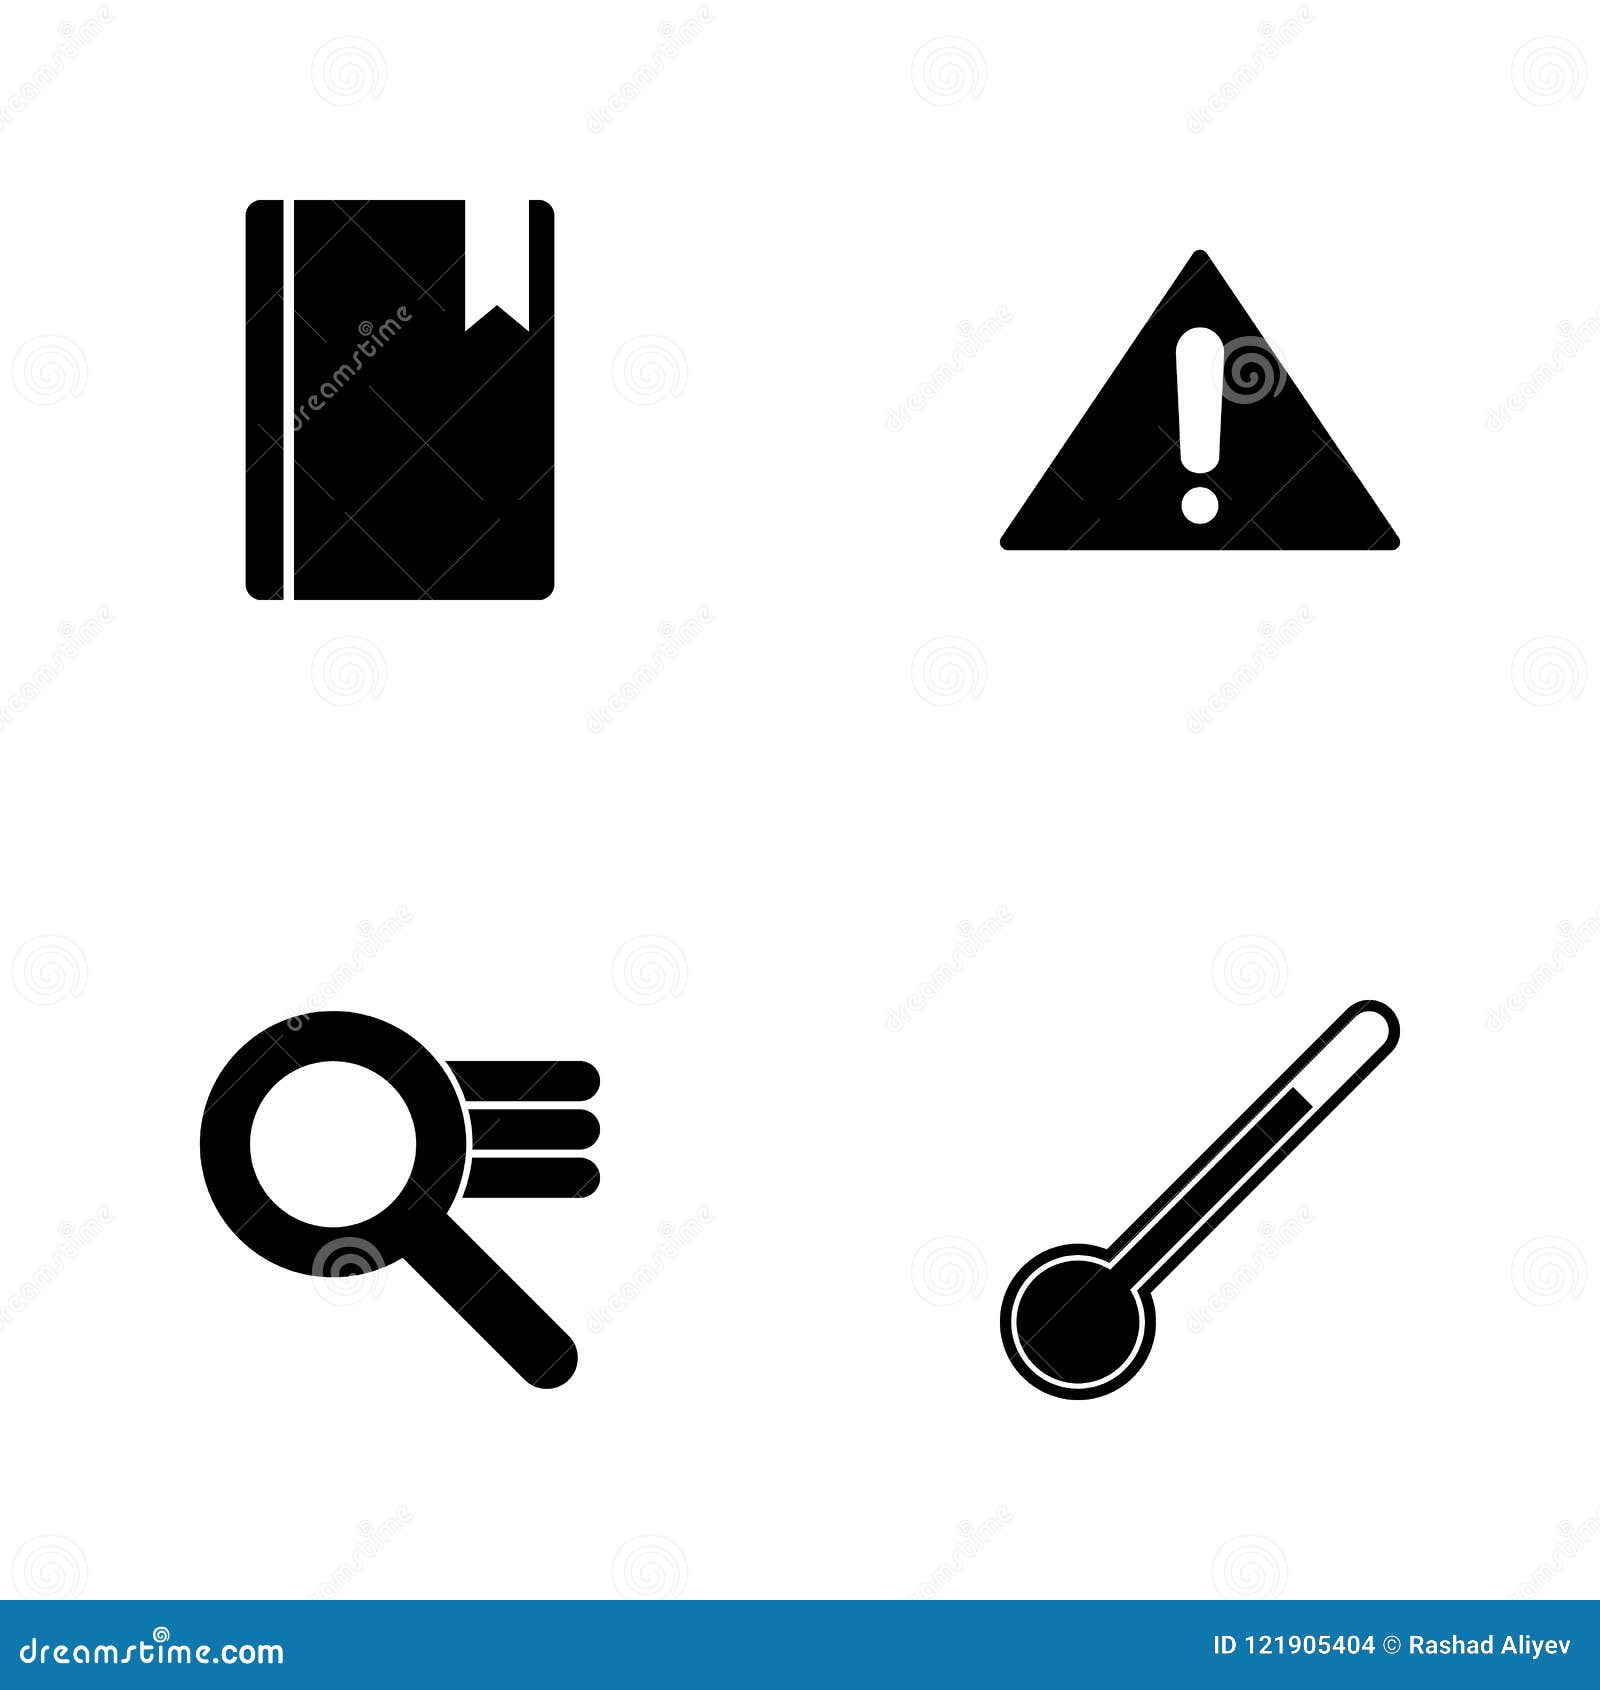   set web icons. s thermometry, search settings sign, attention sign and bookmark in a book icon